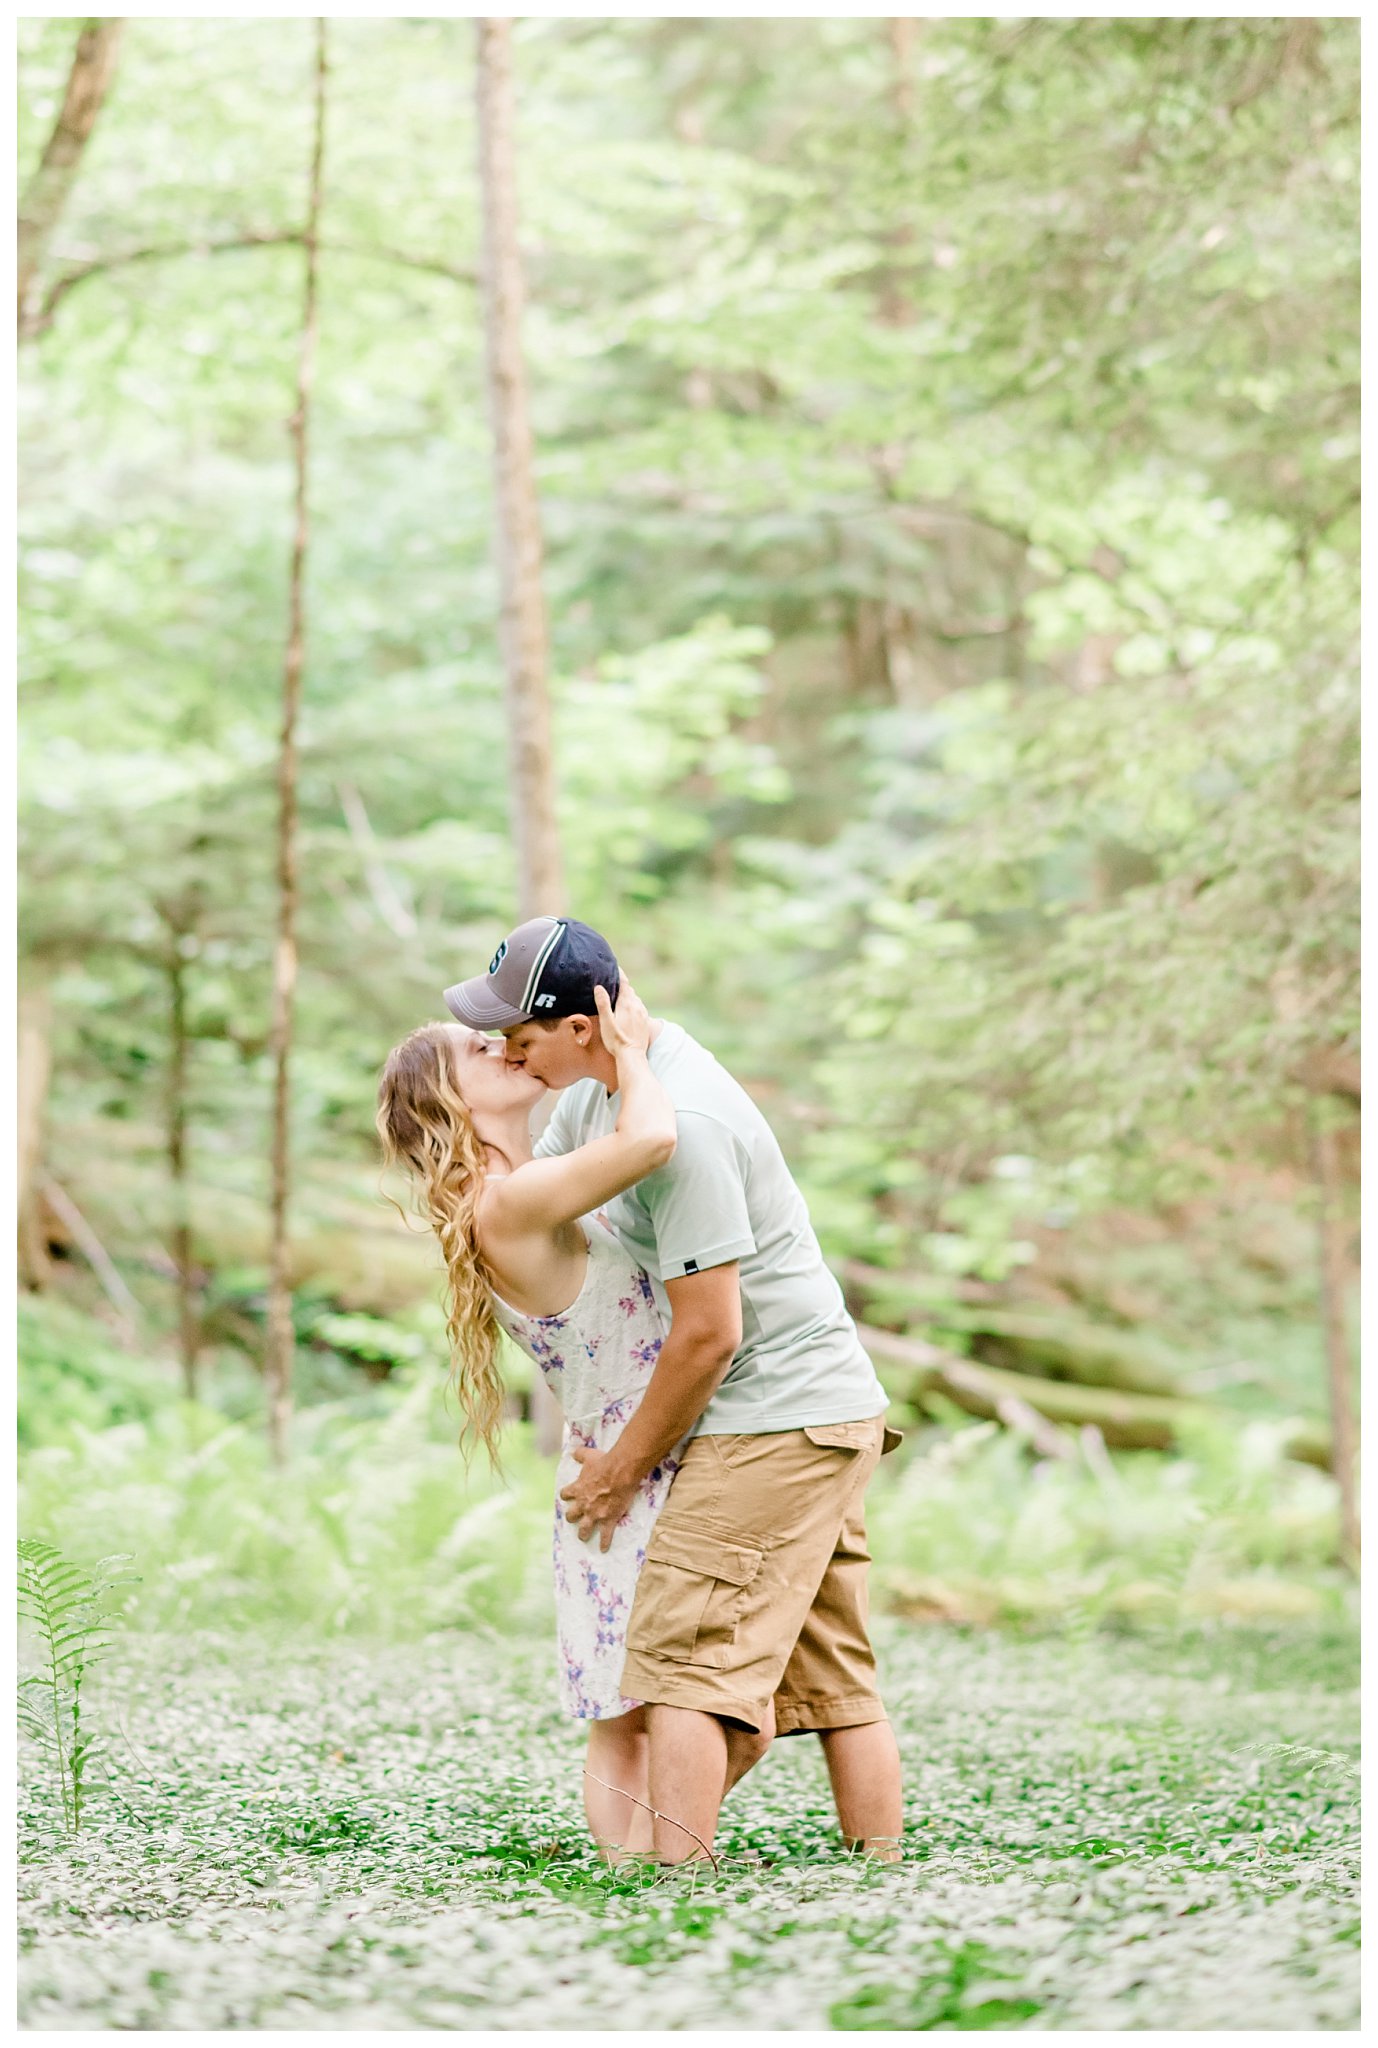 Joanna Young Photography Elizabeth and Cody Engagement Session_0013.jpg